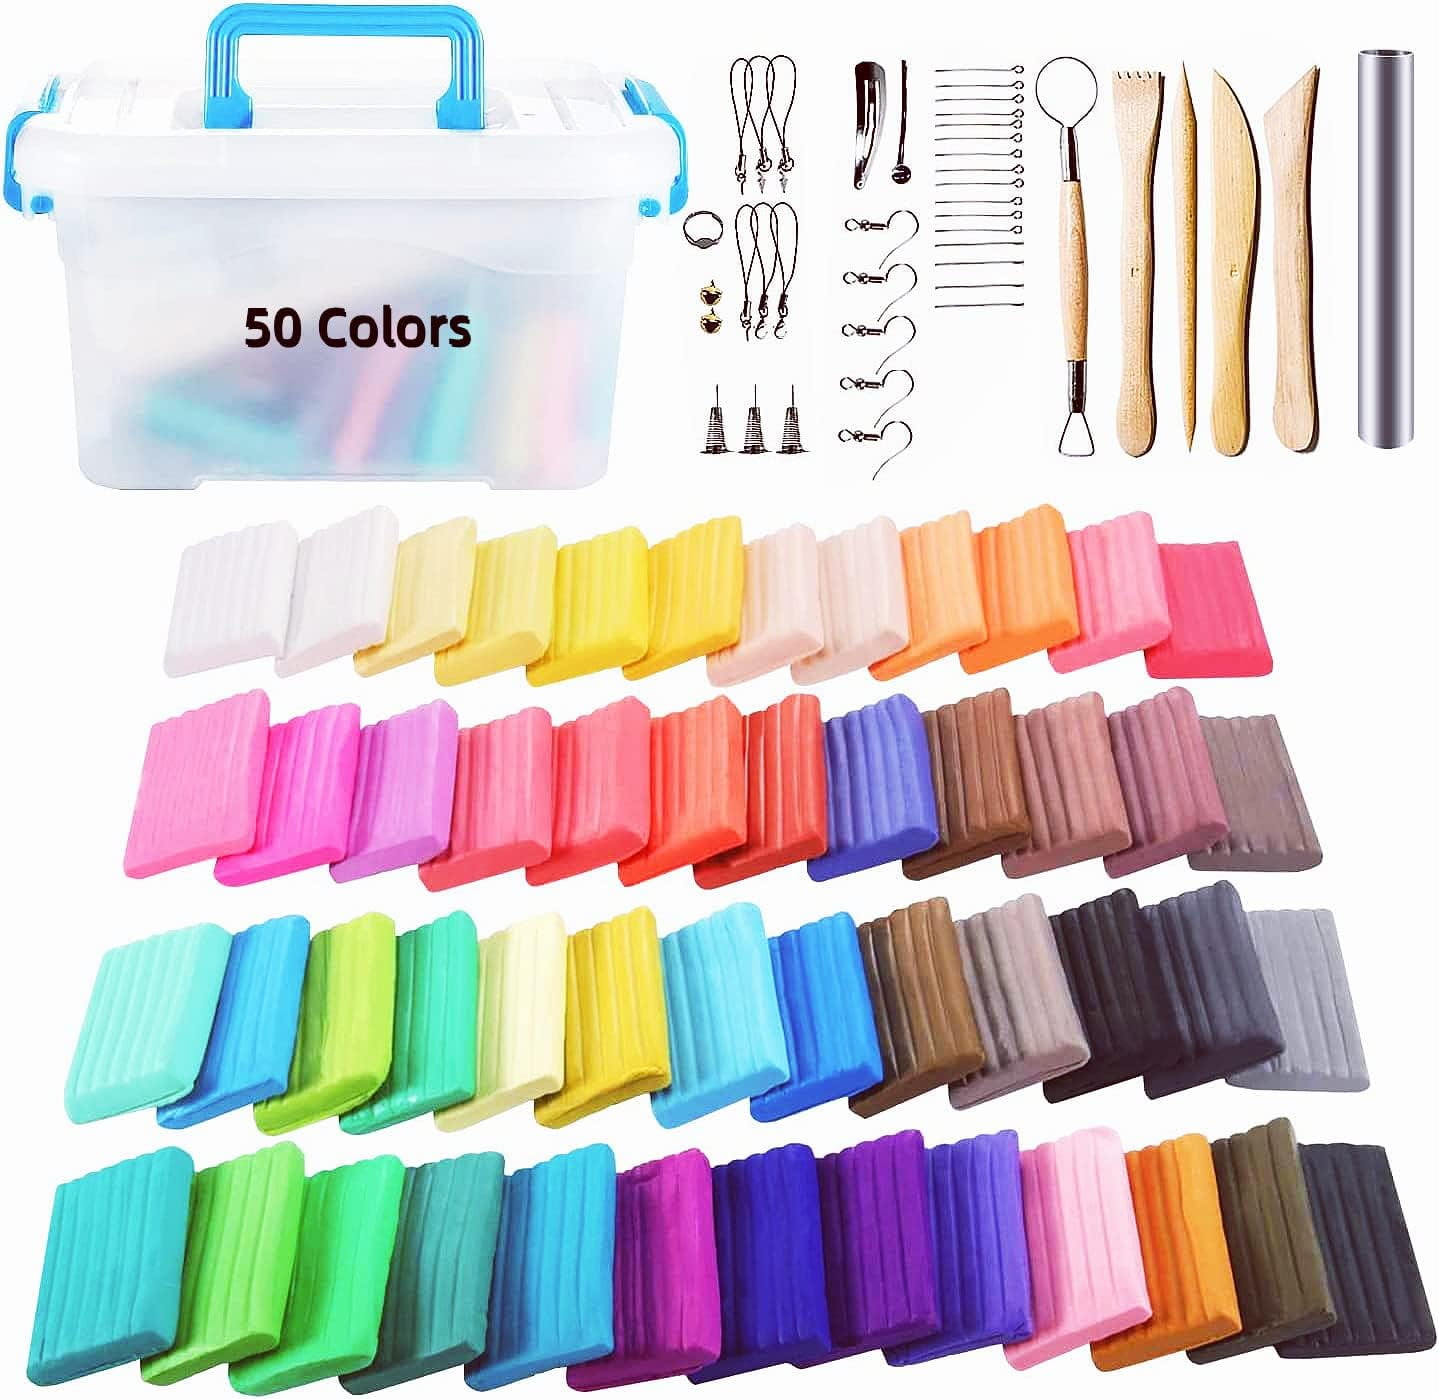 Polymer Clay Starter Kit, 42/32 Colors of Oven-Bake, Baking Clay Blocks,  with 5 Sculpting Tools and 30 Accessories in Storage Box